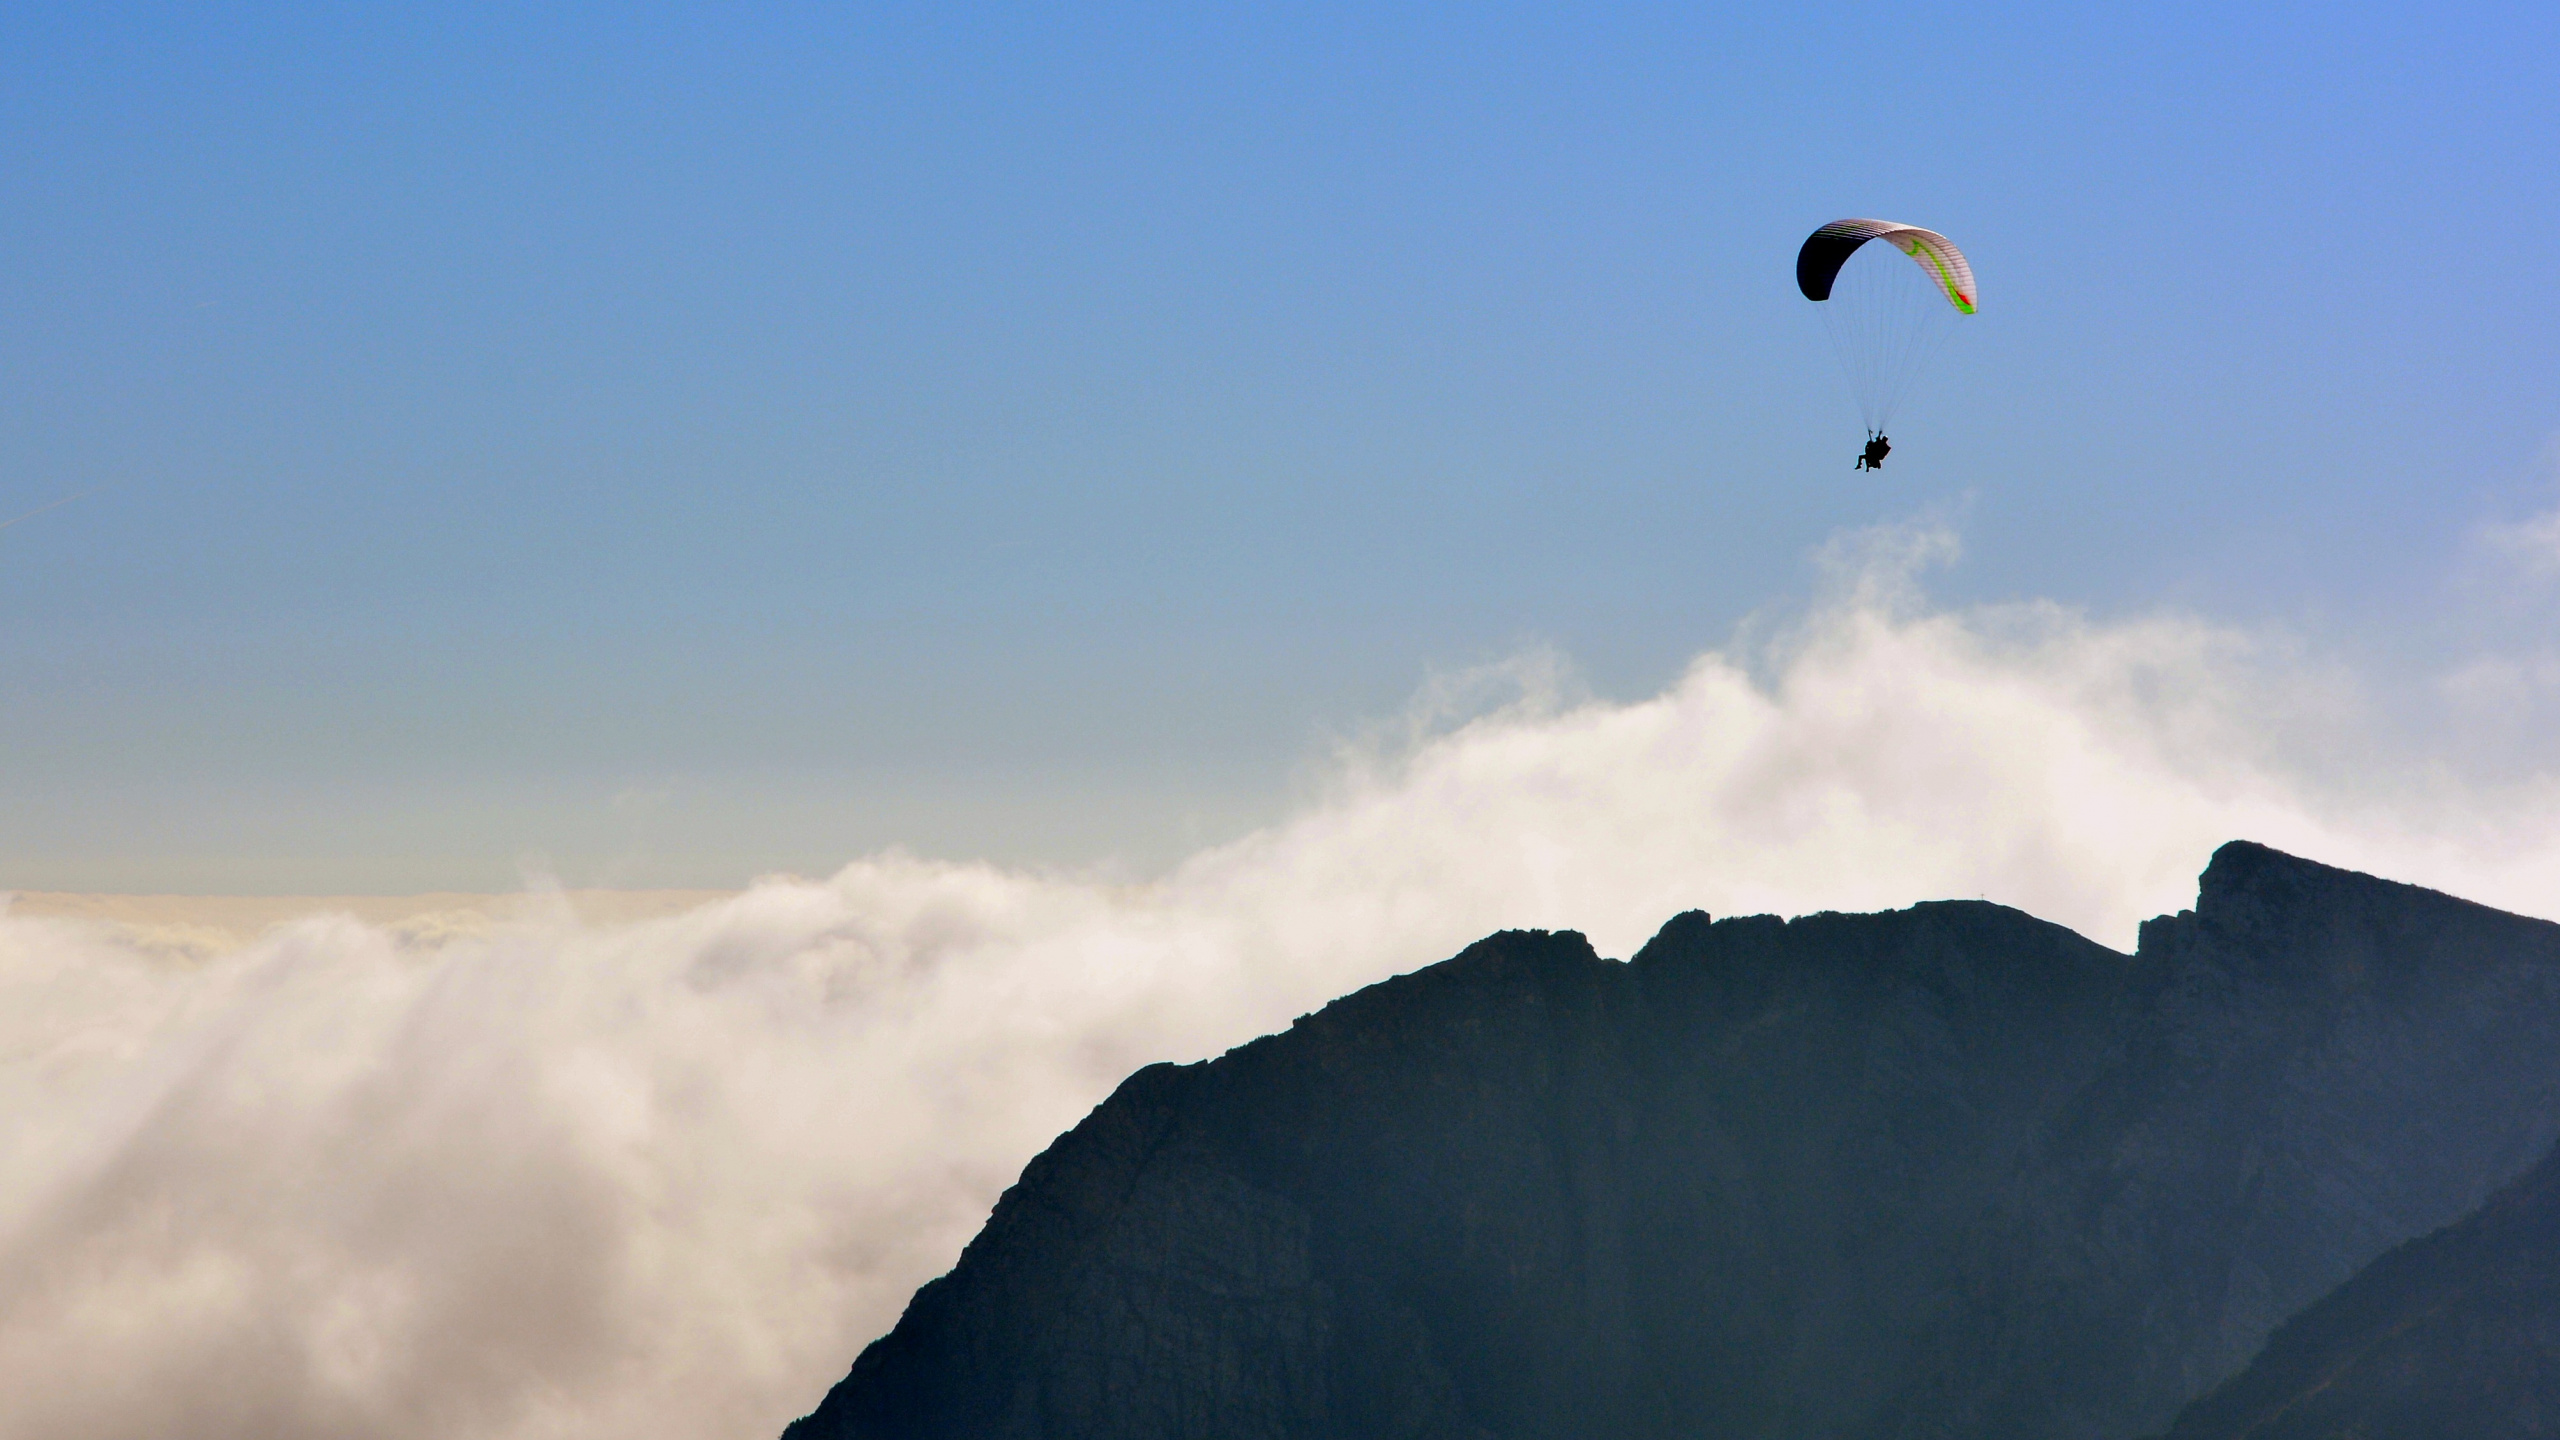 Person Riding Parachute Over Mountain. Wallpaper in 2560x1440 Resolution